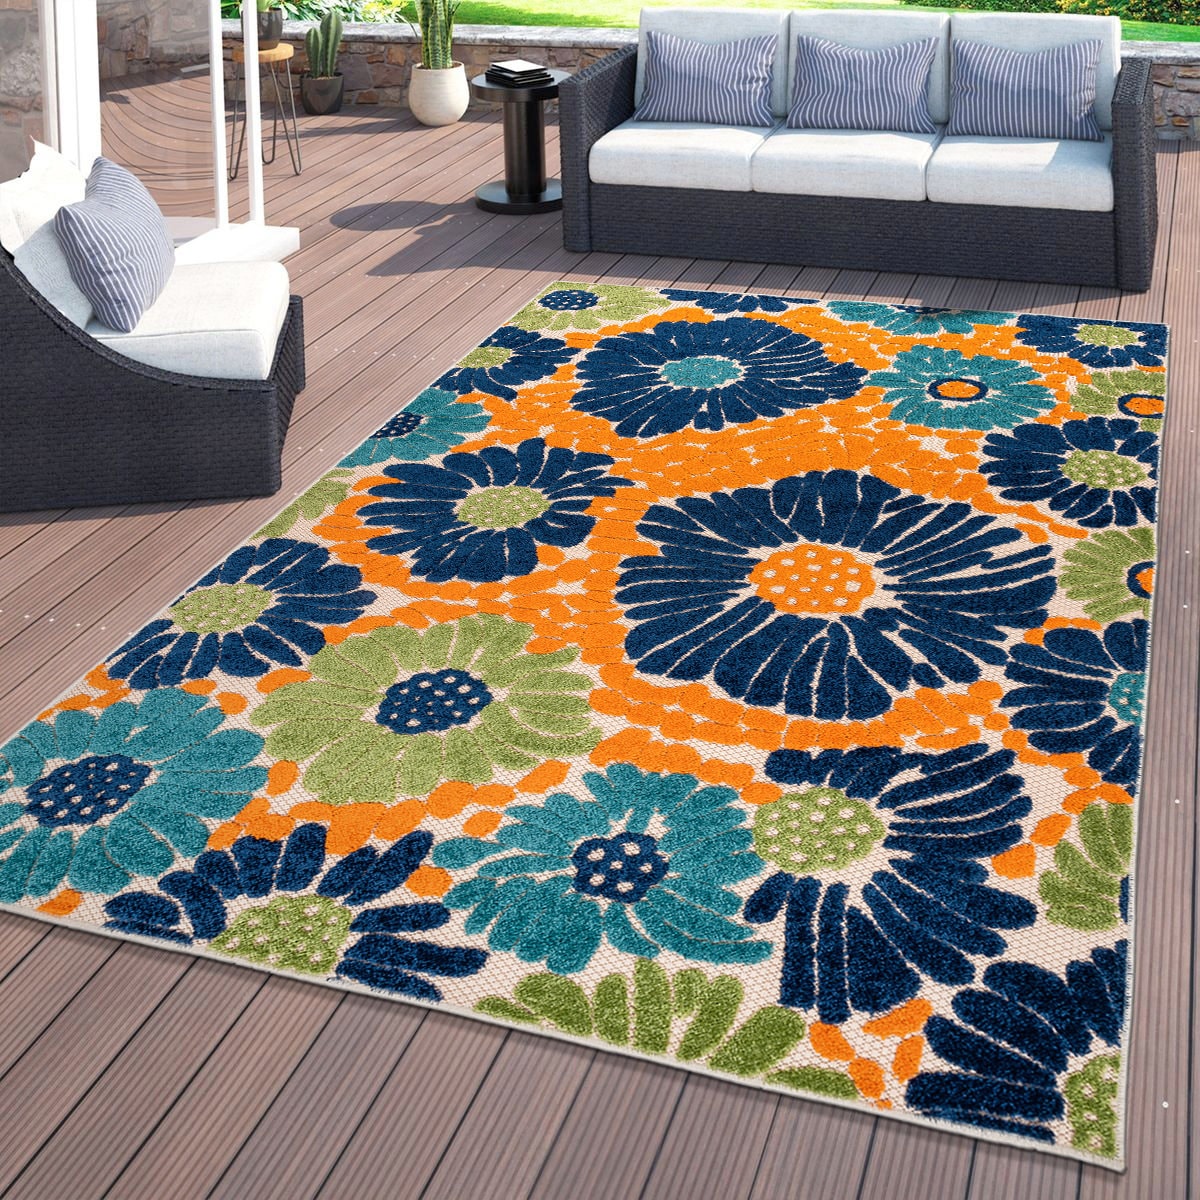 5x7 Water Resistant, Indoor Outdoor Rugs for Patios, Front Door Entry,  Entryway, Deck, Porch, Balcony | Outside Area Rug for Patio | Blue, Floral  